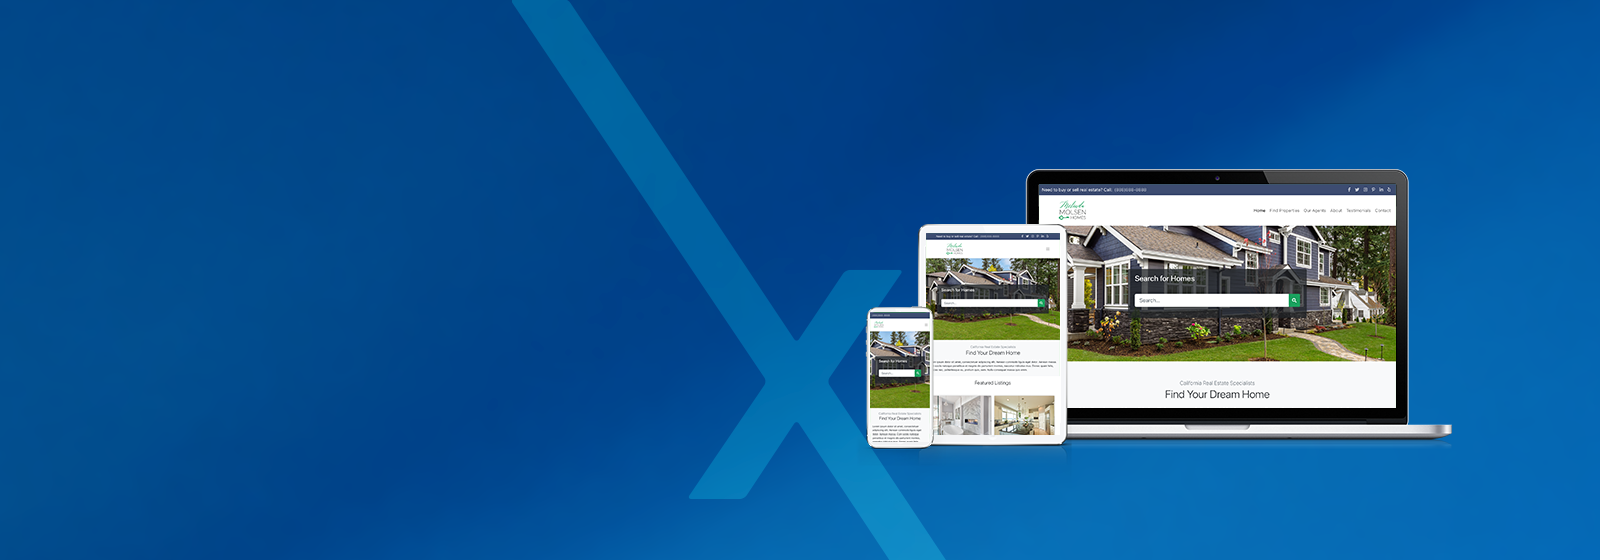 IDX Websites made easy for Agents and Brokerages